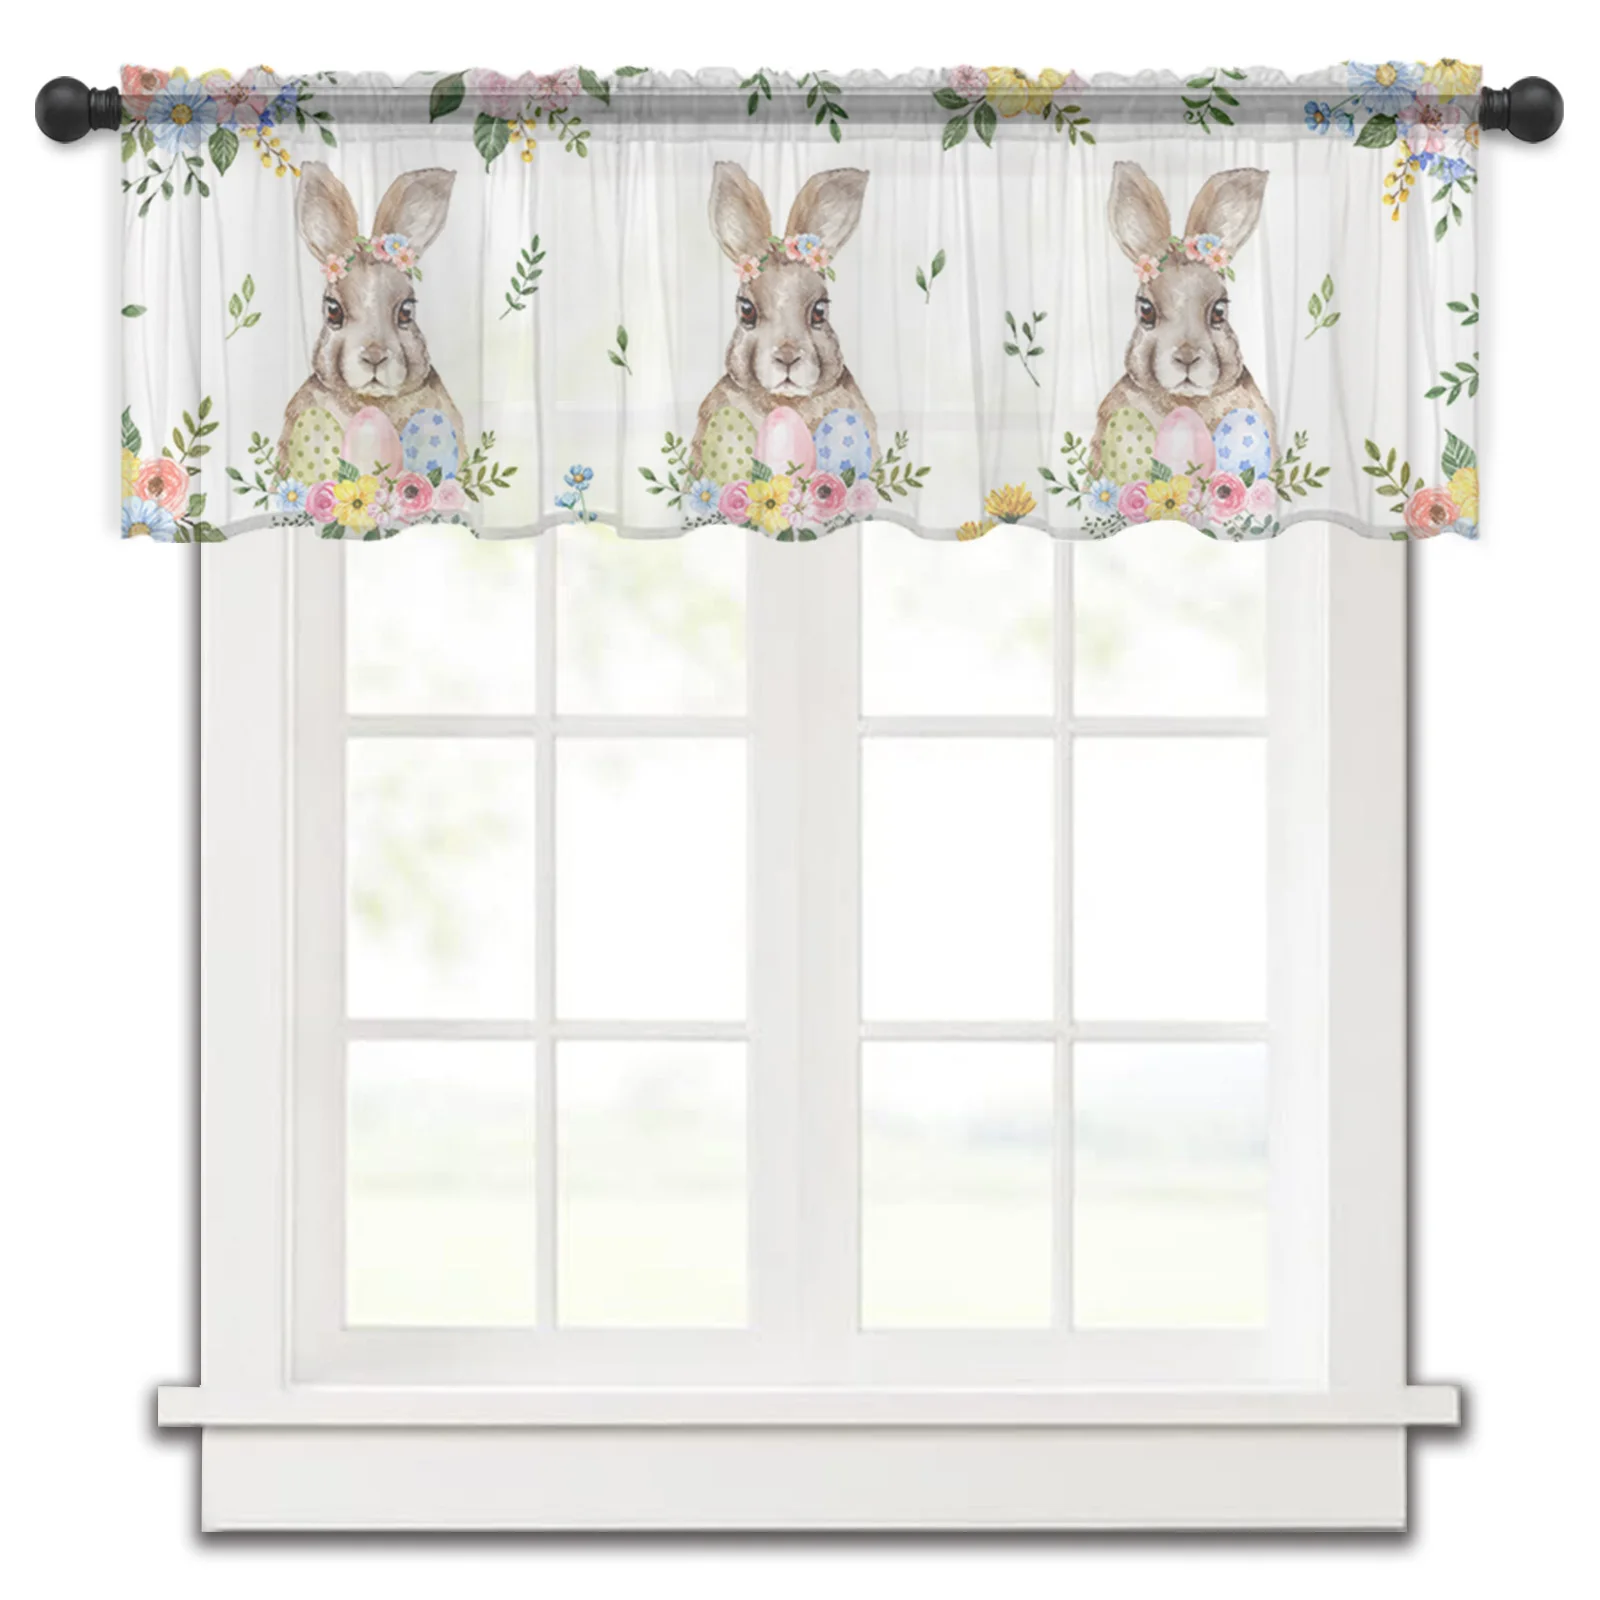 

Easter Spring Plant Flowers Rabbit Eggs Kitchen Curtains Tulle Sheer Short Curtain Bedroom Living Room Home Decor Voile Drapes